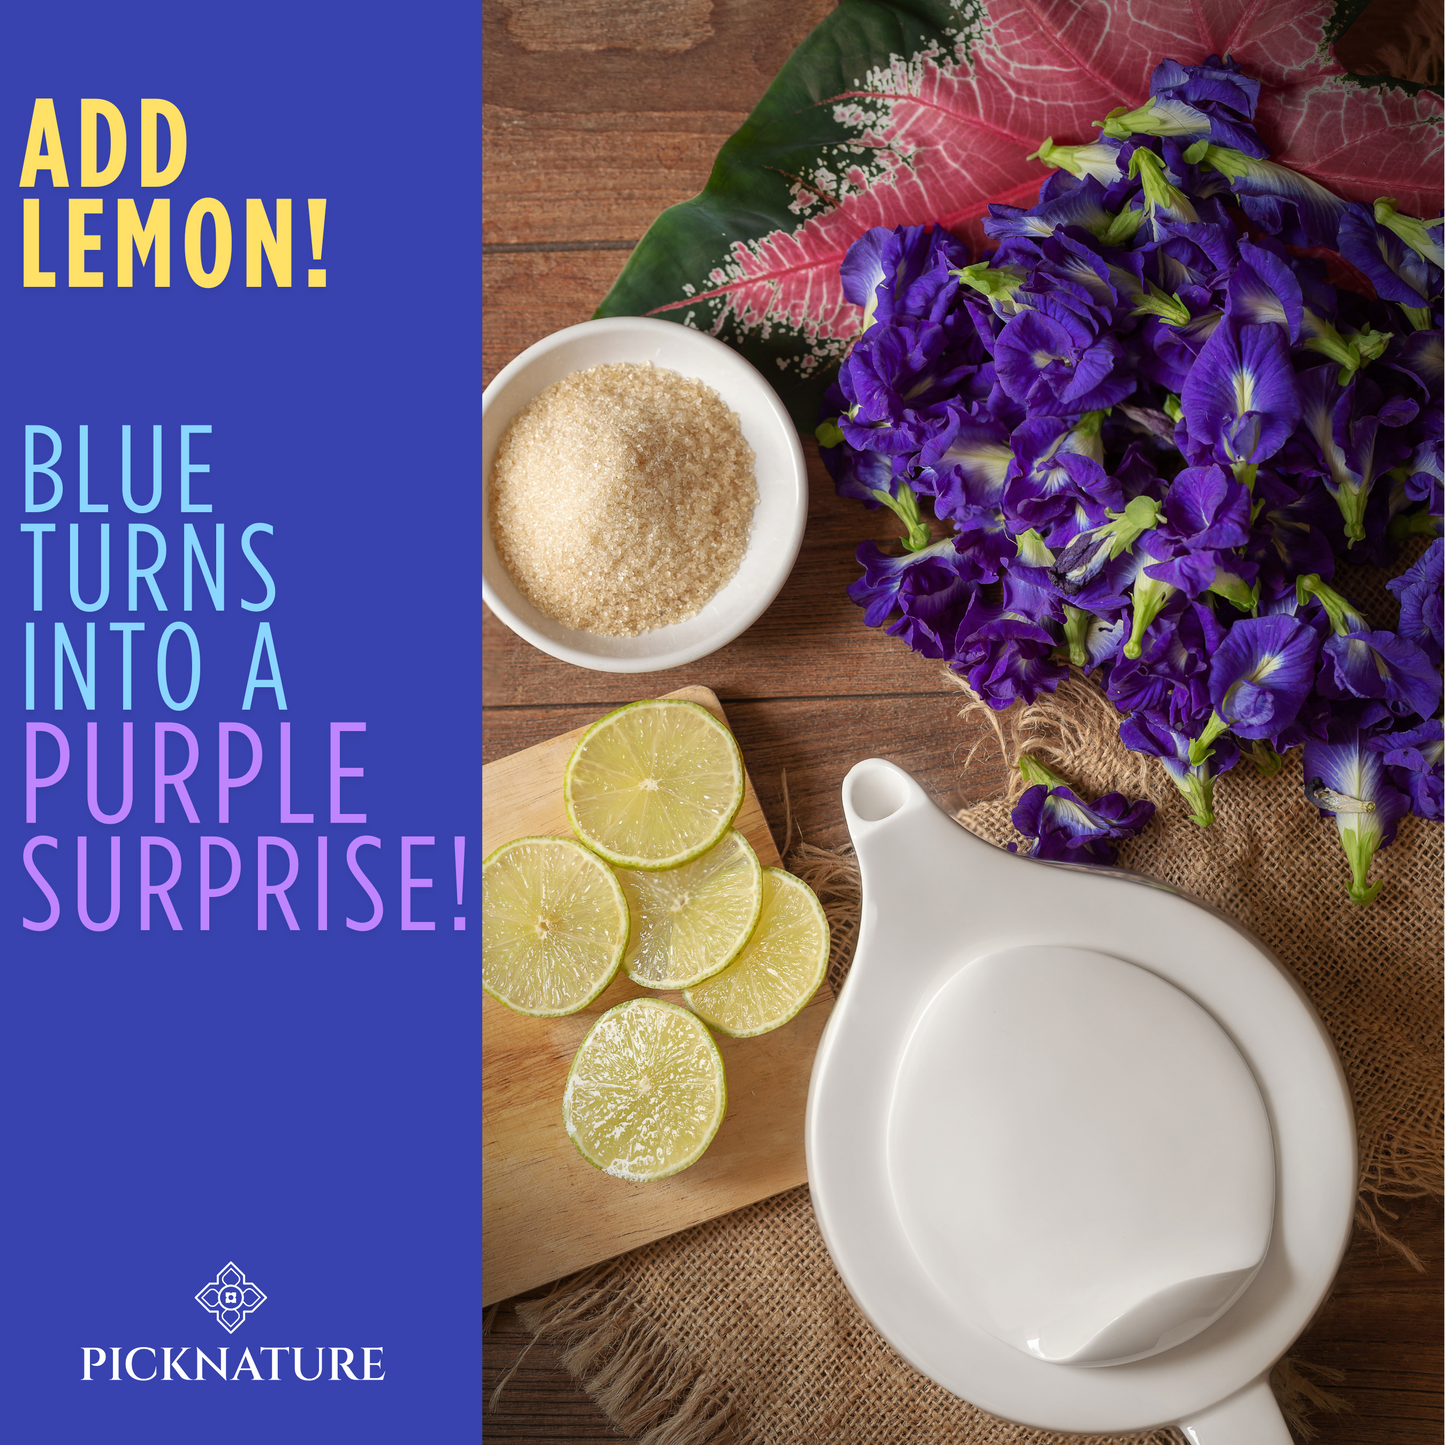 PICKNATURE Butterfly Pea Flower Tea Loose Leaf Whole Petals Freshly Picked From Thailand | 1.05 oz Mini Pack (100+ Cups) | Herbal Blue Tea Gifts | USDA Organic